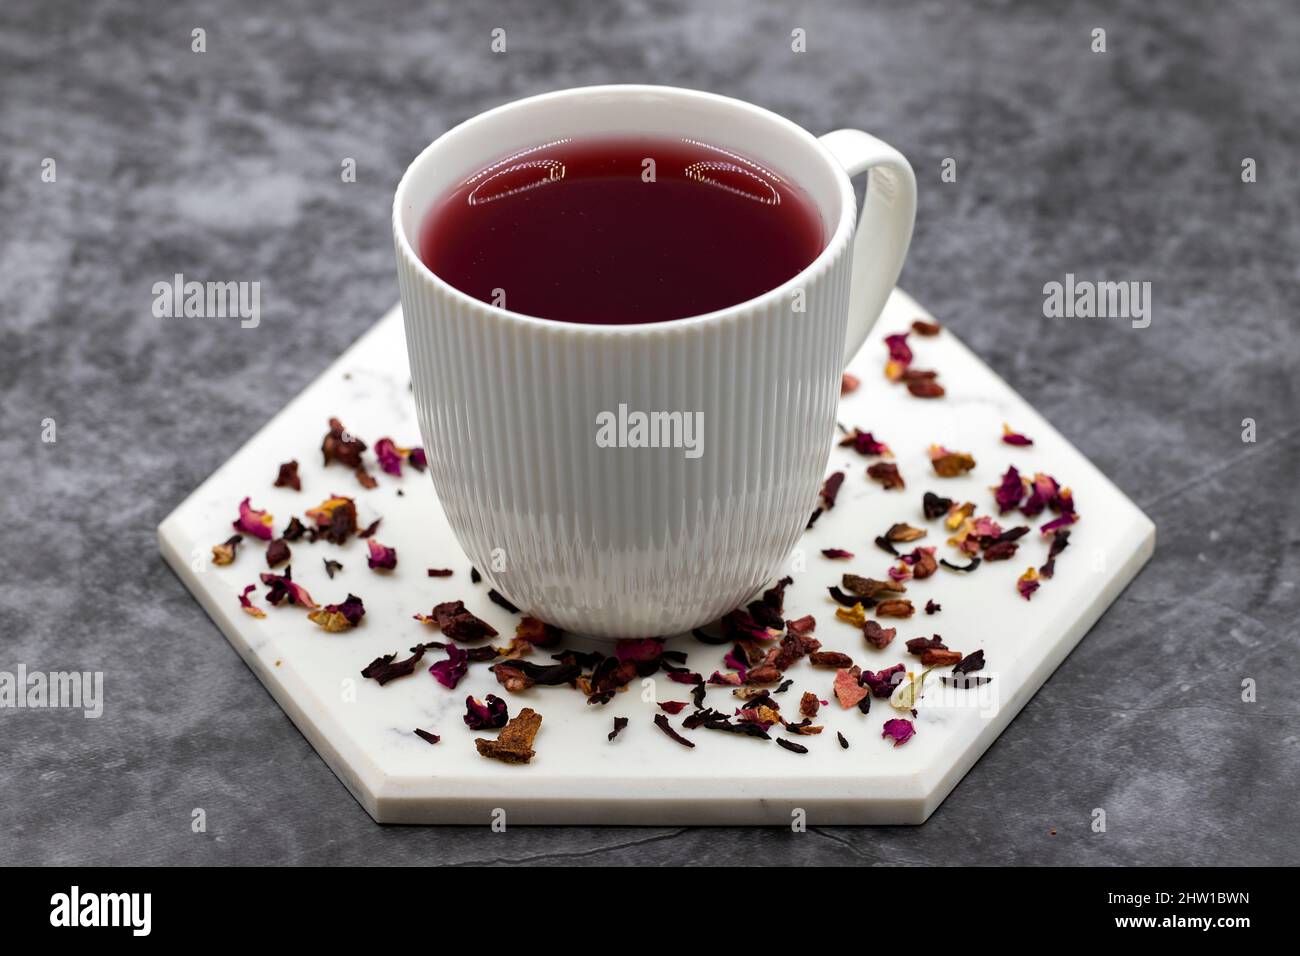 Pomegranate tea on a dark background. Herbal tea prepared with pomegranate seeds, pomegranate peel, hibiscus, clove, cinnamon particles. Stock Photo